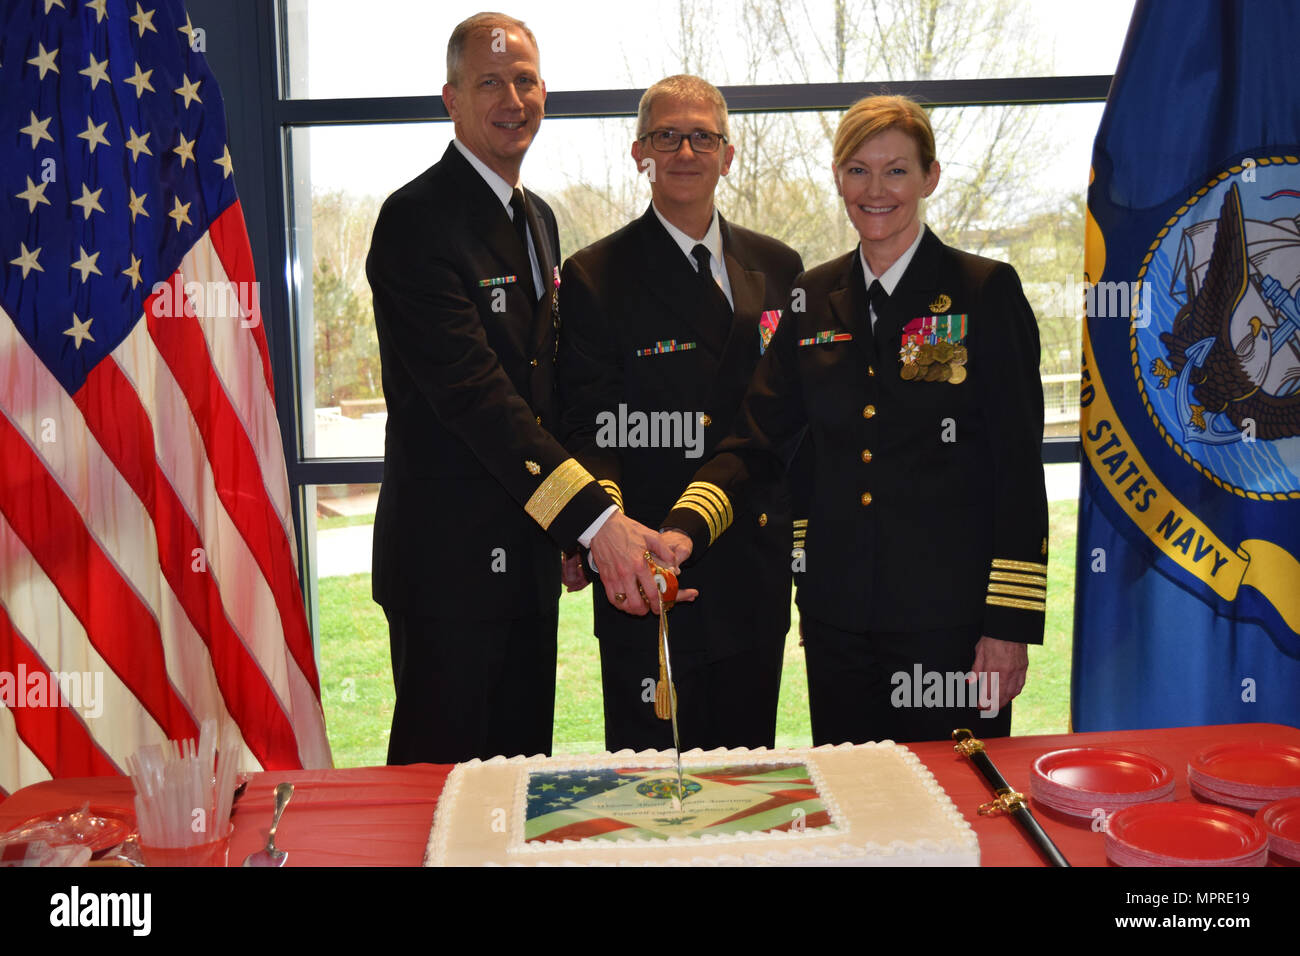 VIRIN: 170406-N-LJ212-056 SILVER SPRING (April 6, 2017) Rear Admiral Paul D. Pearigen, Commander, Navy Medicine West, Captain Adam W. Armstrong, Commanding Officer, Naval Medical Research Center, and Captain Jacqueline D. Rychnovsky celebrate the Naval Medical Research Center change of command and retirement of Captain Rychnovsky. Captain Rychnovsky relinquished command to Captain Adam W. Armstrong. ( U.S. Navy Photo by Public Affairs Specialist Katherine Berland/Released) Stock Photo